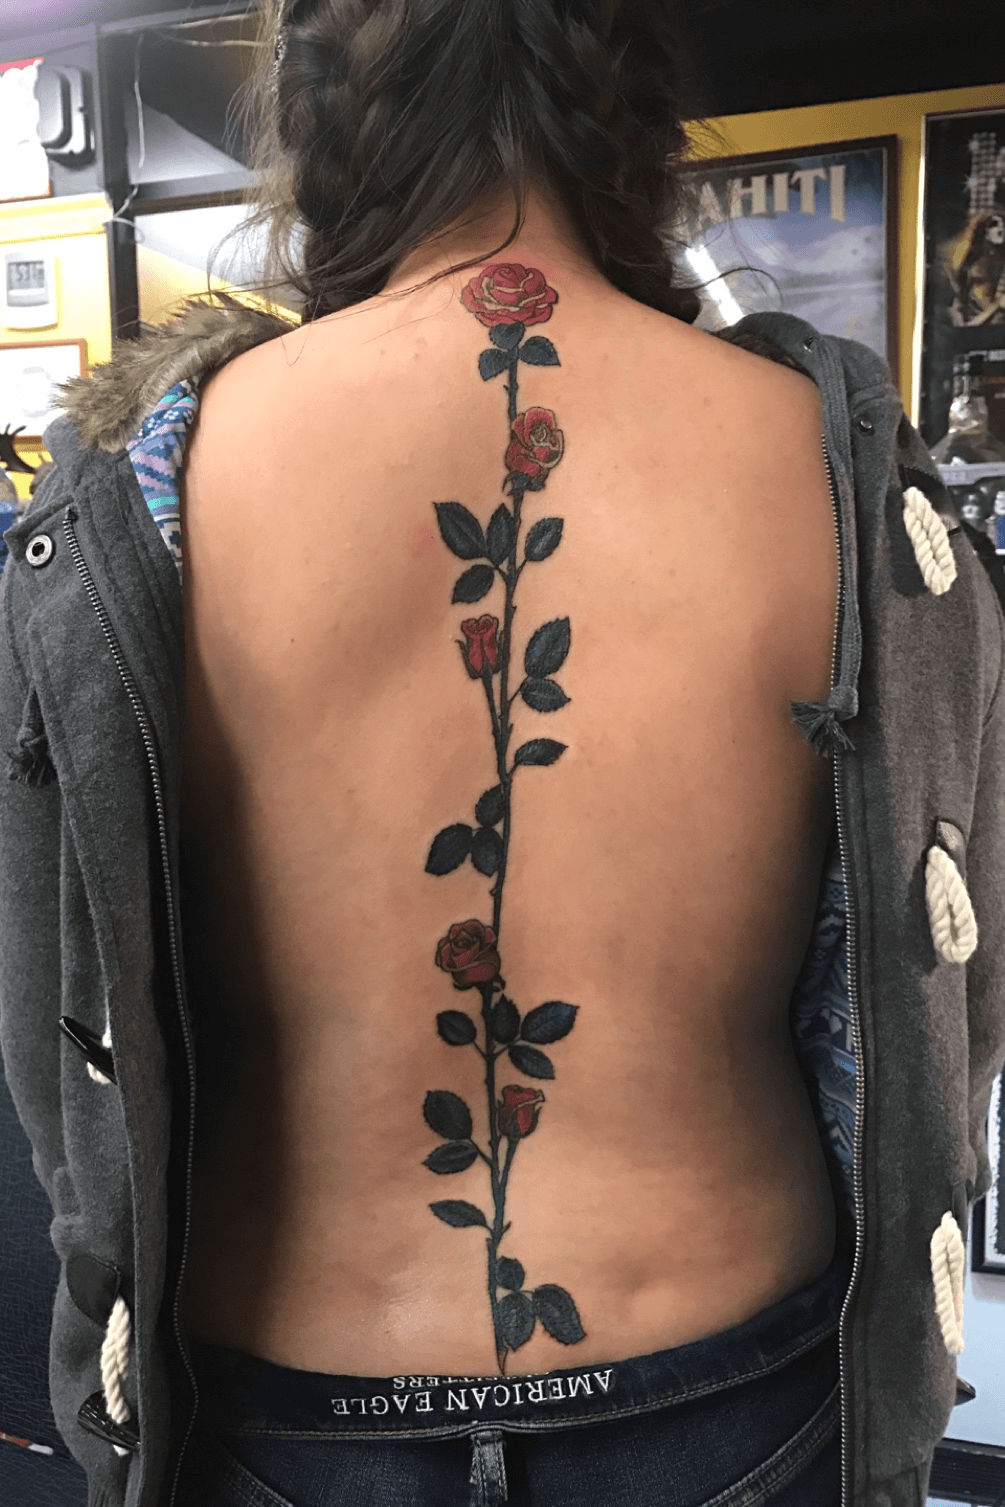 Floral spine tattoo I did last week  she was one tough cookie   rTattooDesigns